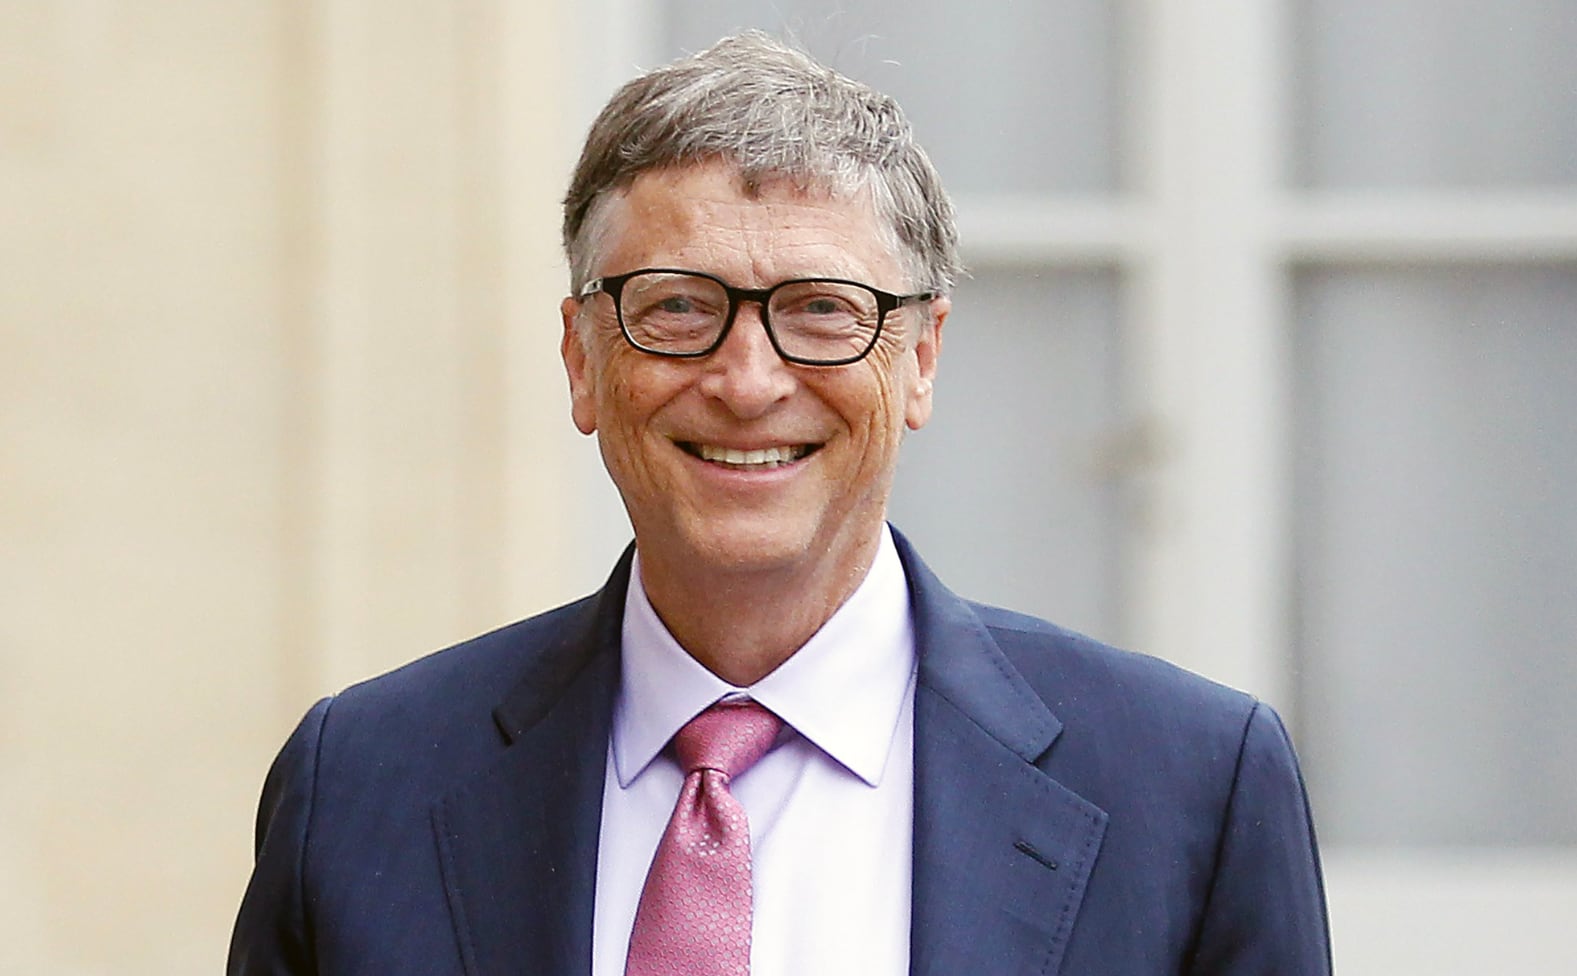 Bill Gates withdraws from Microsoft board to become a full-time philanthropist